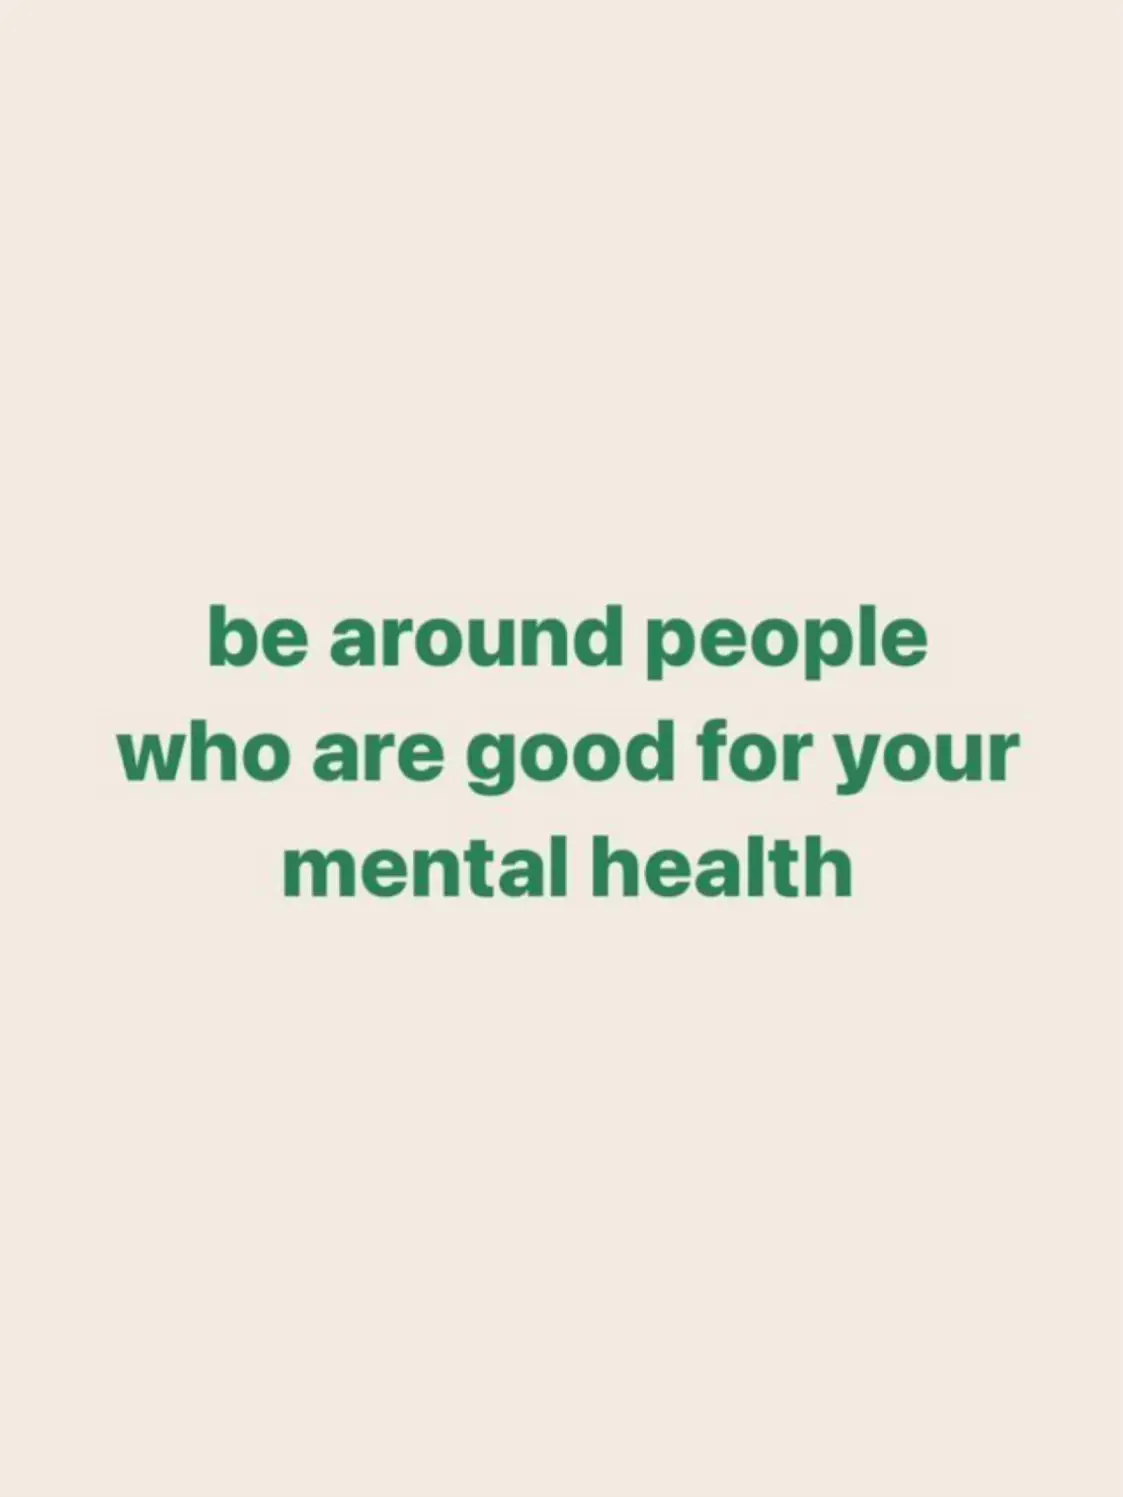  A white background with a green text that says "be around people who are good for your mental health".